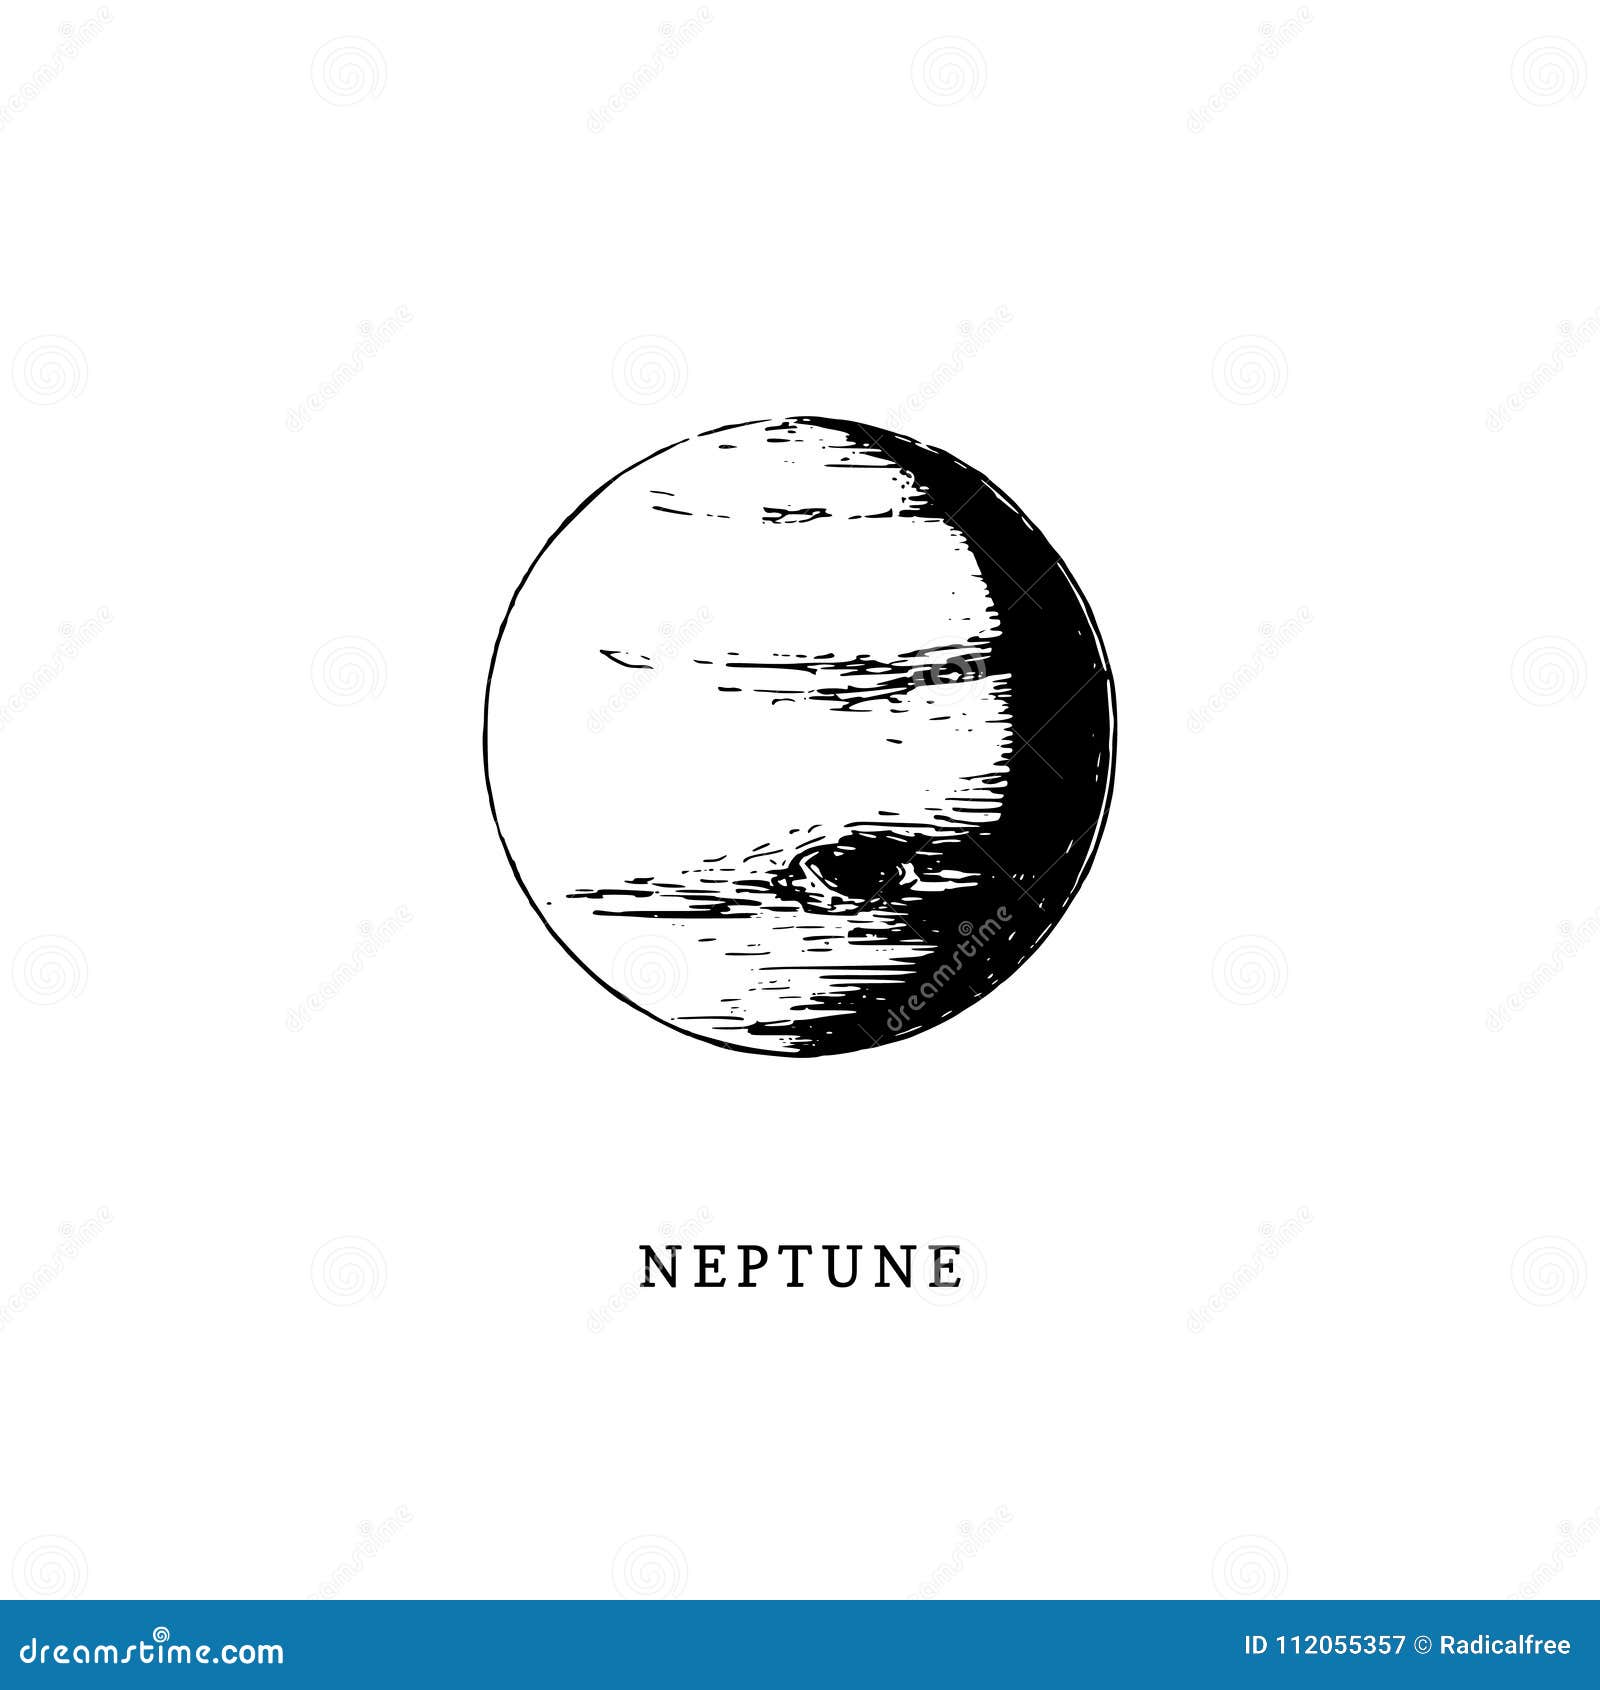 Neptune Planet Image on White Background. Hand Drawn Vector